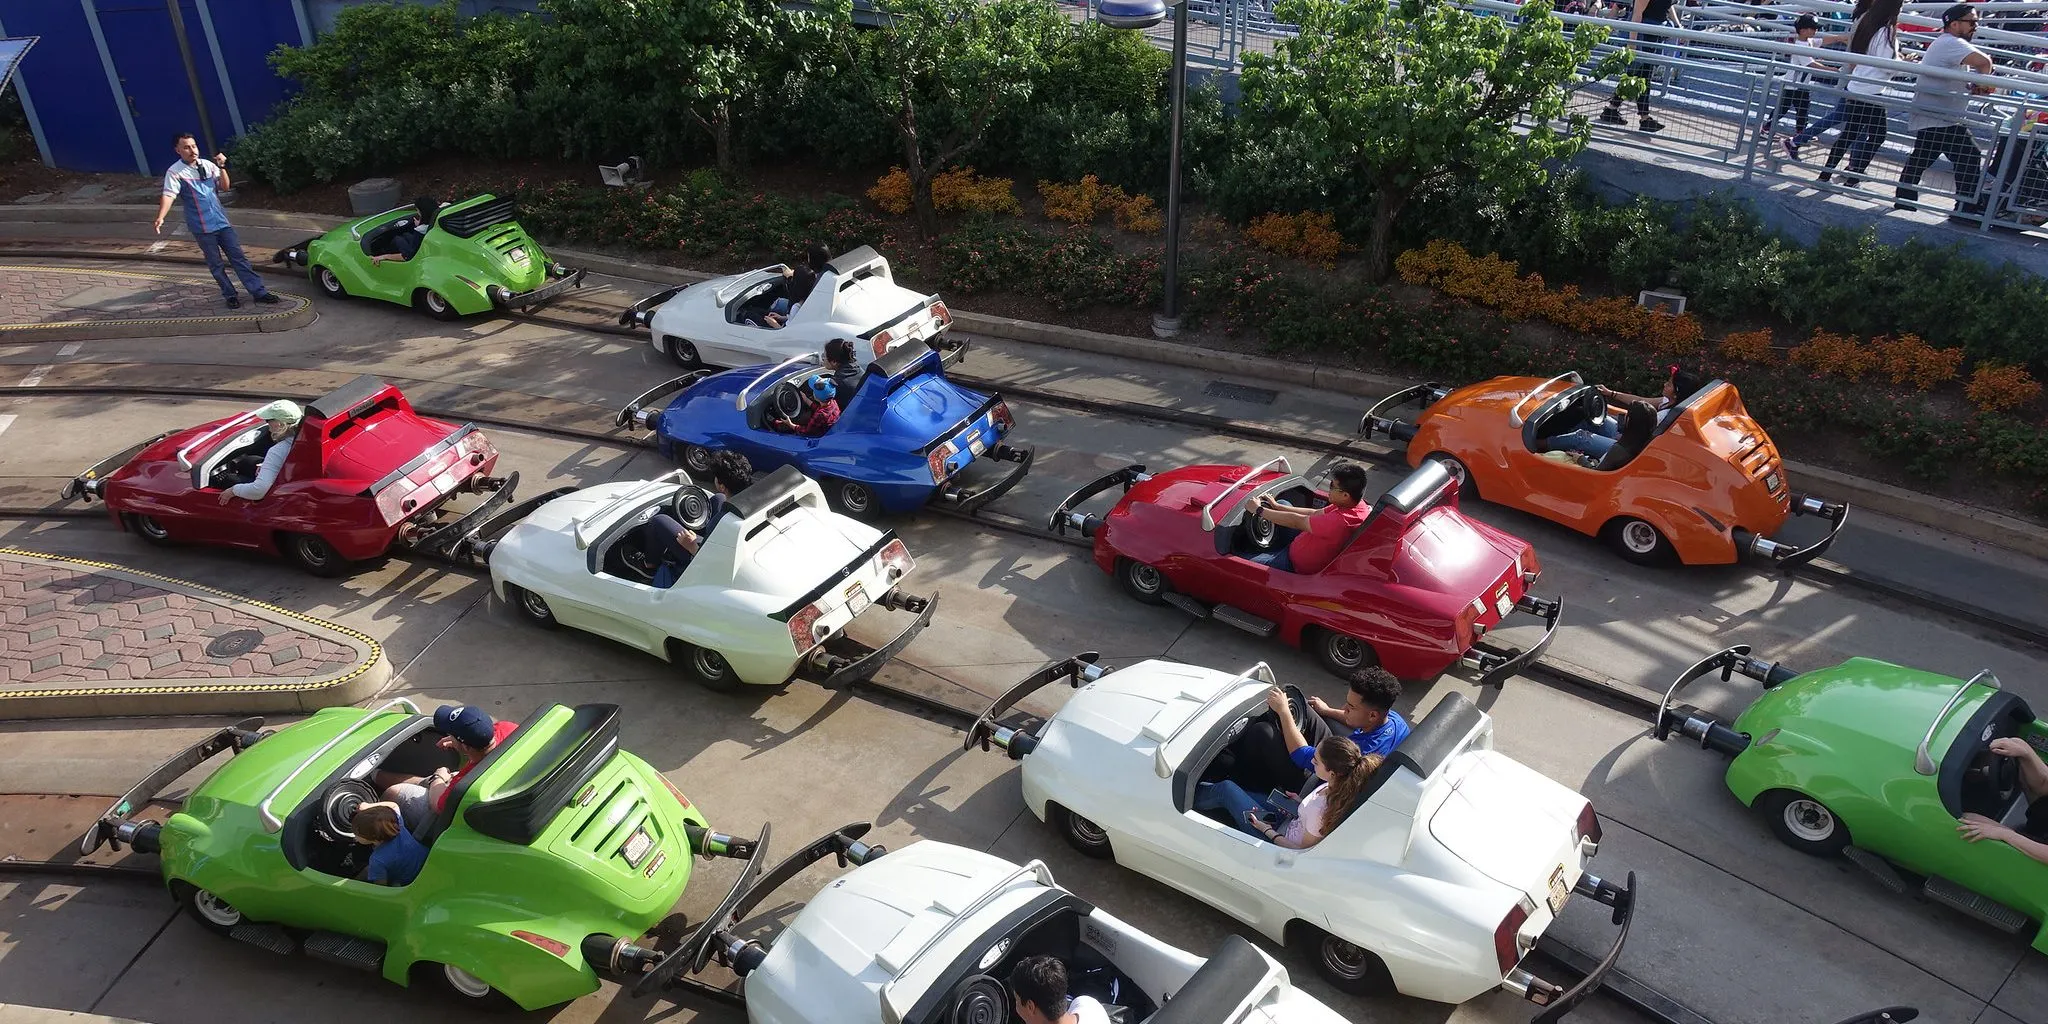 Disneyland's Autopia Ride Could Go All-Electric: What This Means for Tomorrow's Green Travel